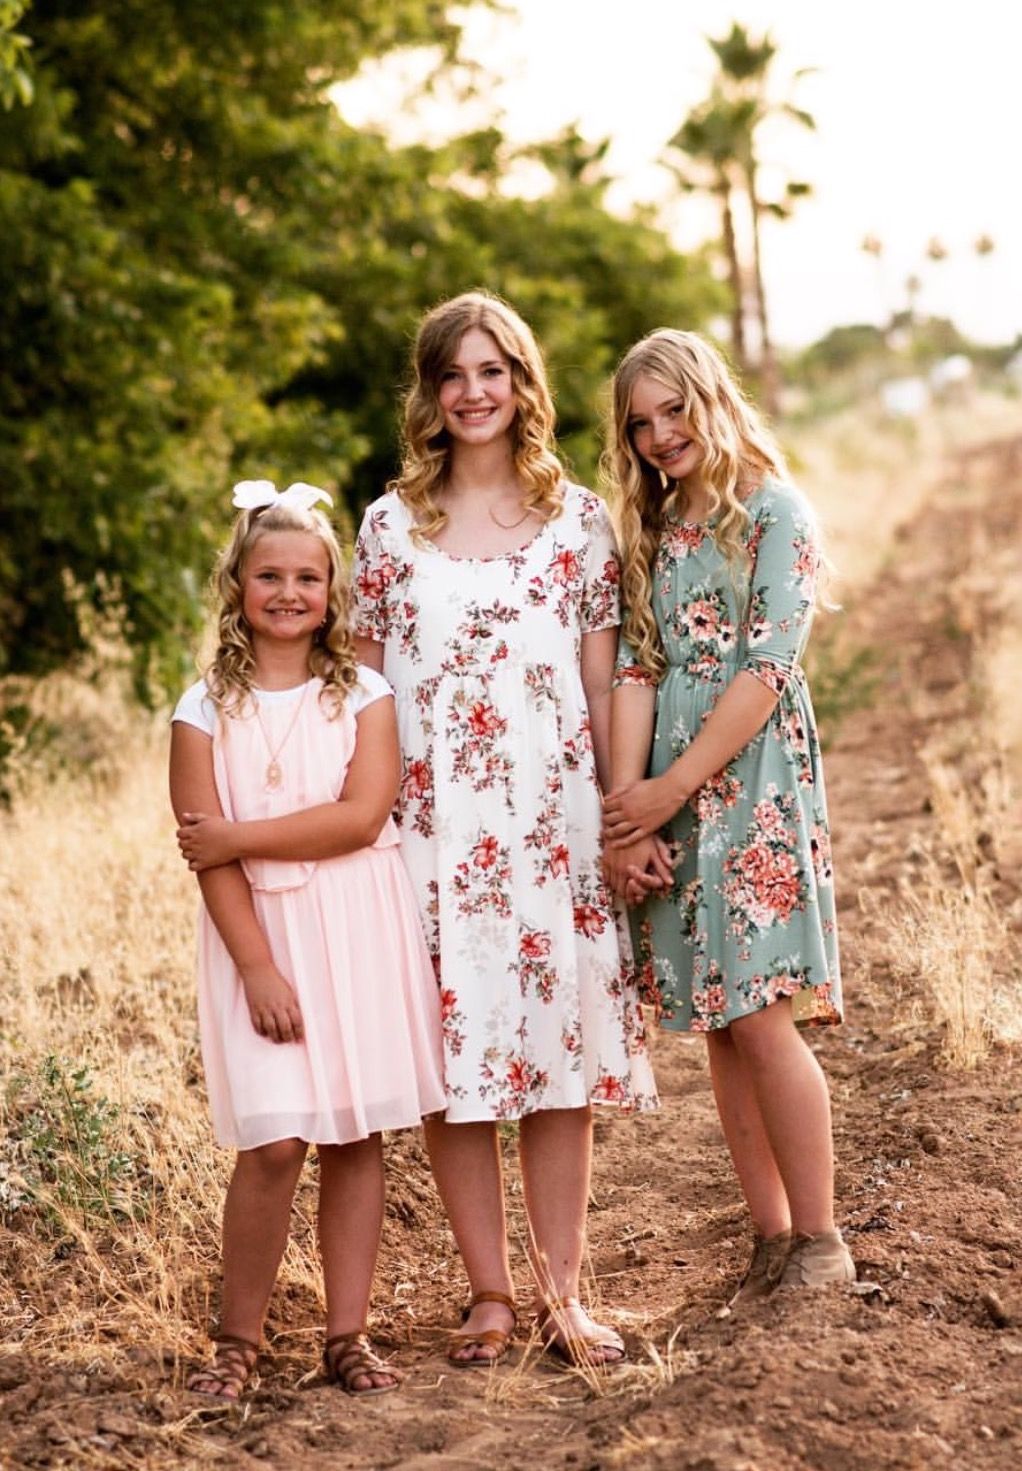 Floral Patterns. 70+ Best Chosen Family Photo Outfit Ideas in Summer - 37